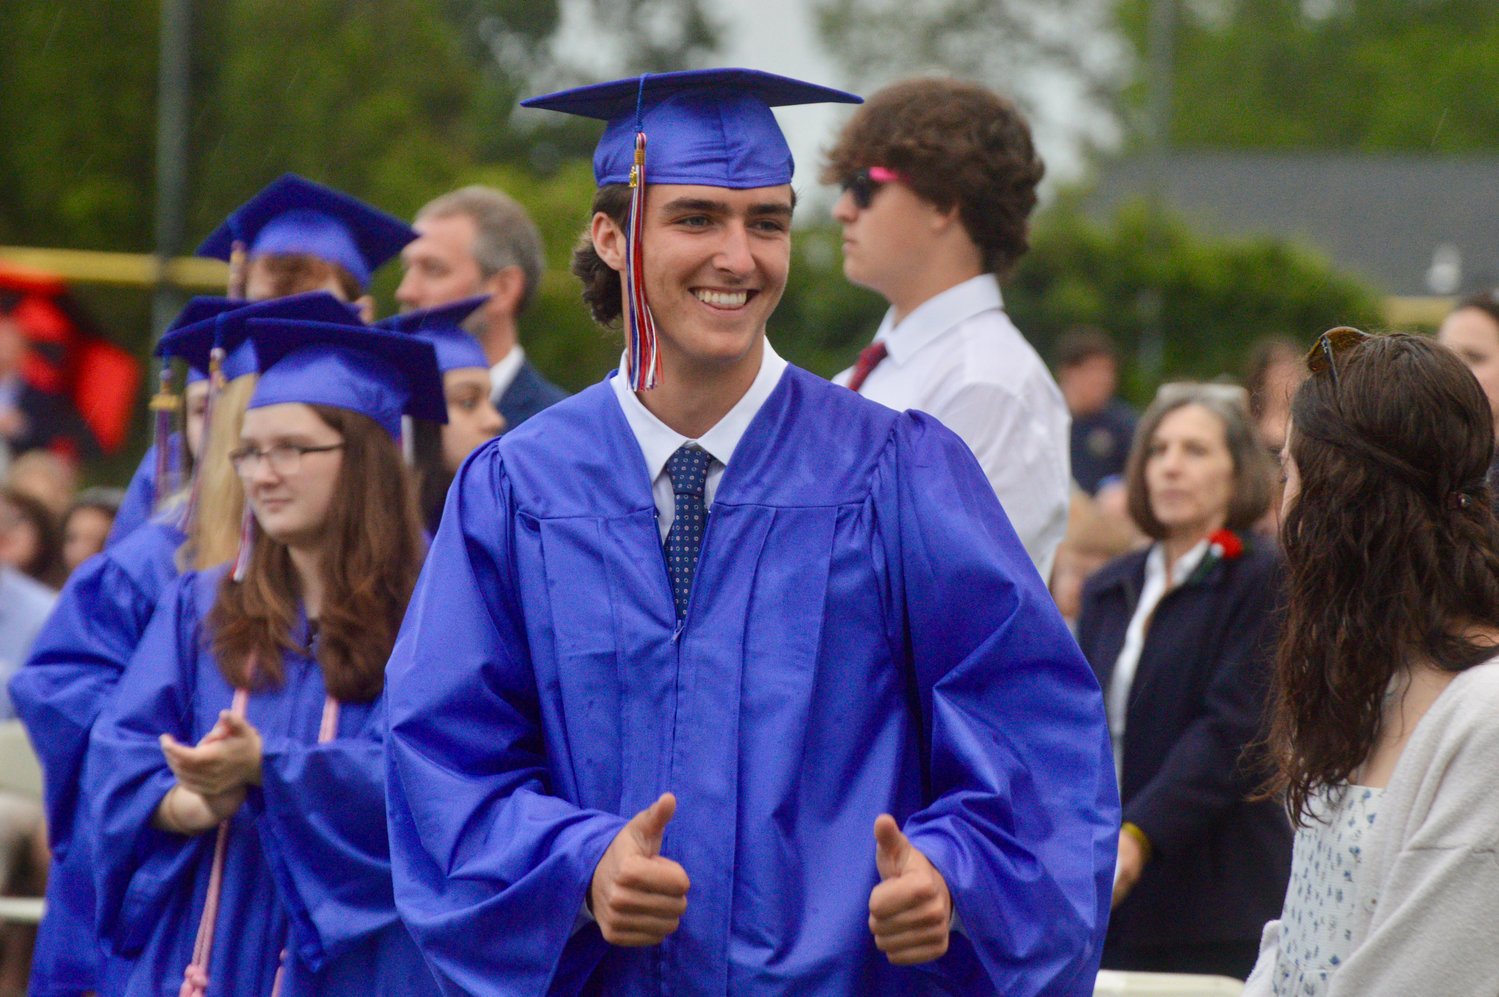 Hunter Tavares flashes a double thumbs-up to a photographer before walking on stage to collect his diploma.